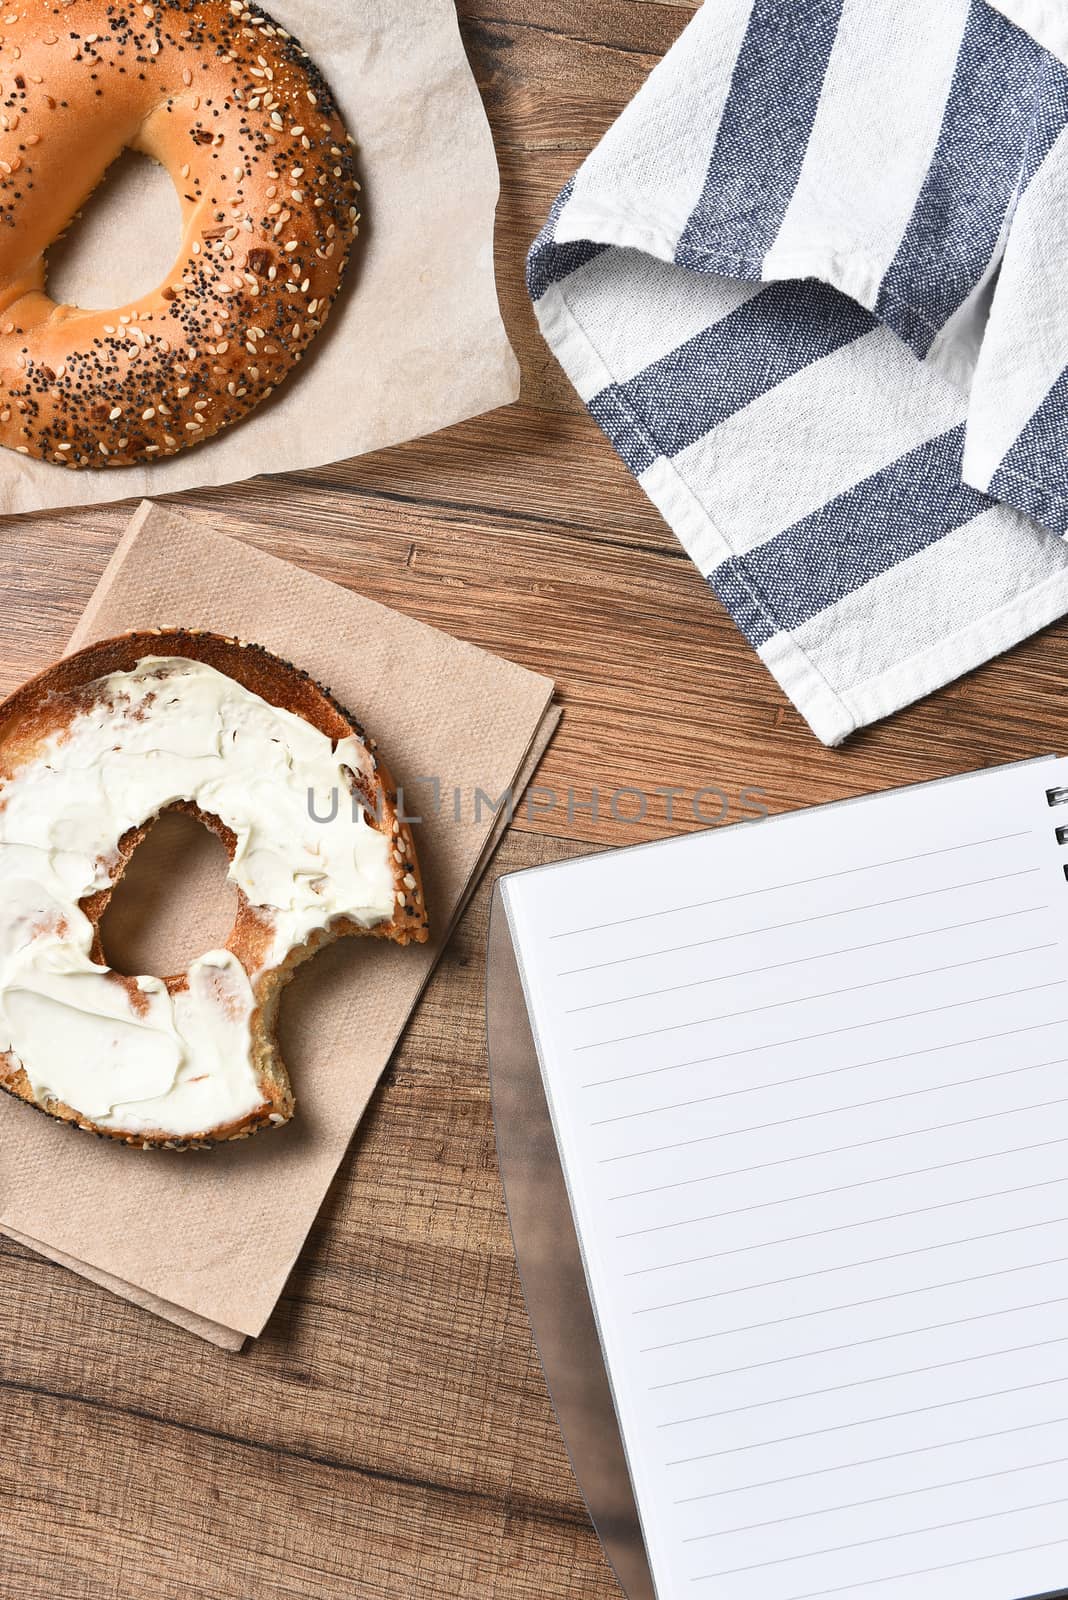 A bagel with cream cheese and a bite taken out. With a towel and note pad on a rustic wood desk. High angle view in vertical format,